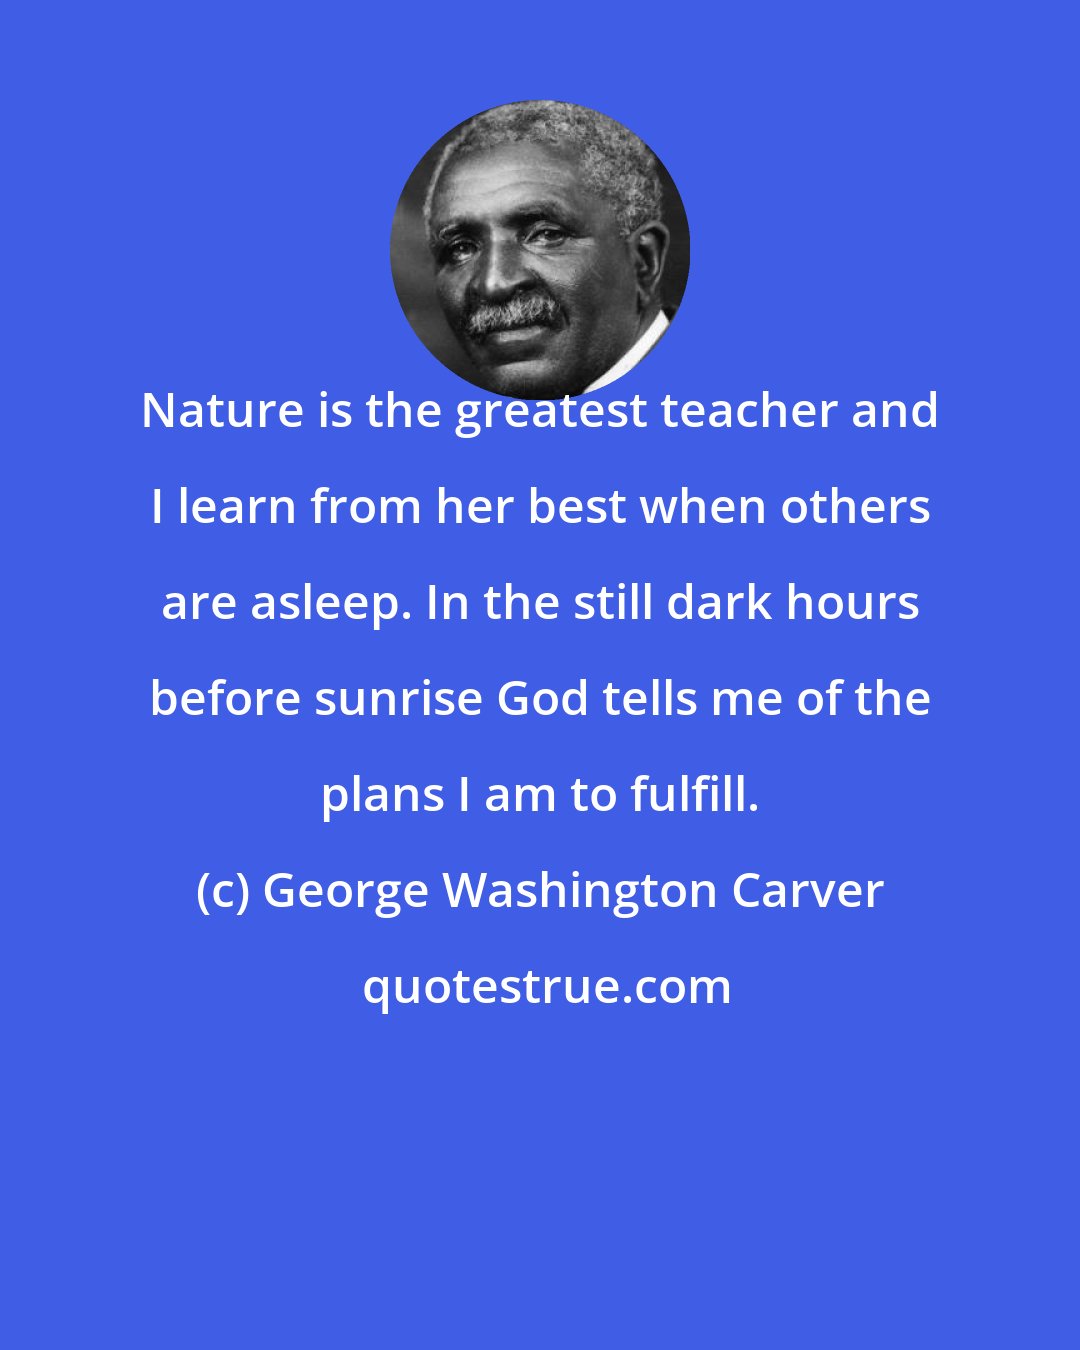 George Washington Carver: Nature is the greatest teacher and I learn from her best when others are asleep. In the still dark hours before sunrise God tells me of the plans I am to fulfill.